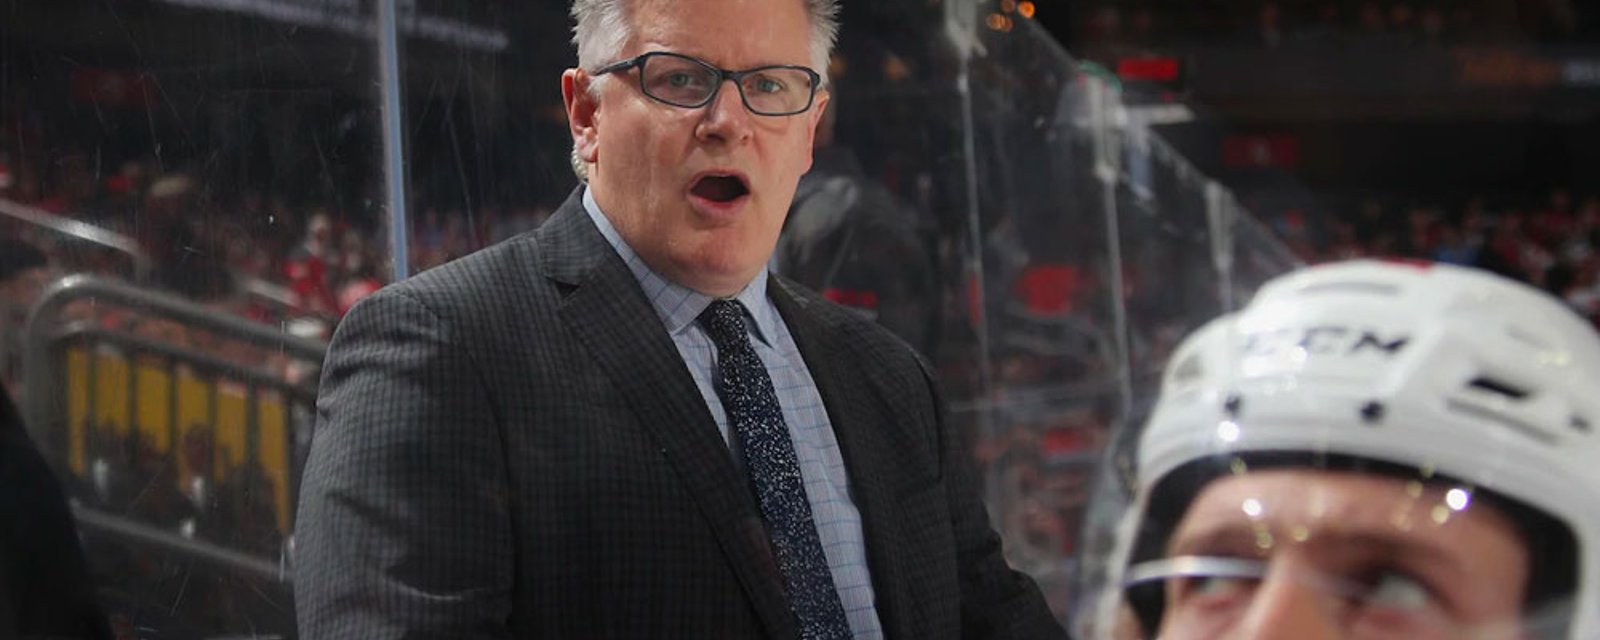 Blackhawks remove Crawford from coaching staff amidst abuse allegations